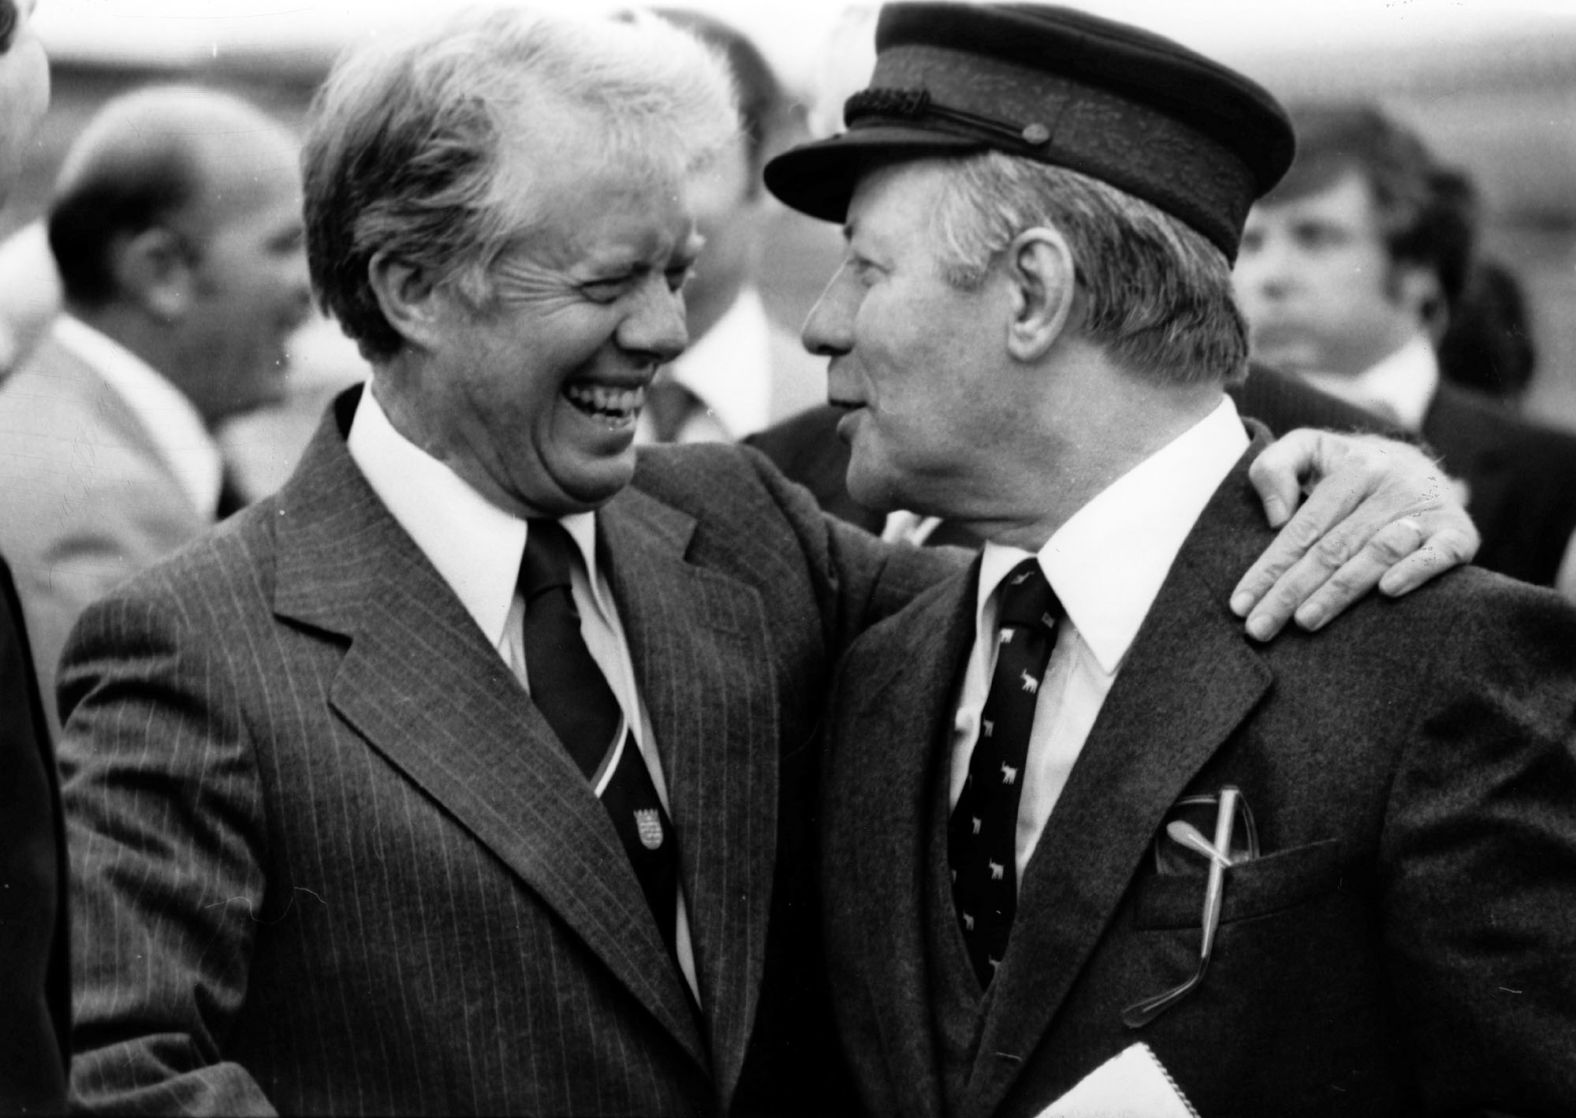 Carter and West German Chancellor Helmut Schmidt are all smiles as they prepare to depart Berlin in July 1978. Carter and Schmidt came to Berlin to see the Berlin Wall and the Airlift Memorial and hold a town meeting with citizens of Berlin.